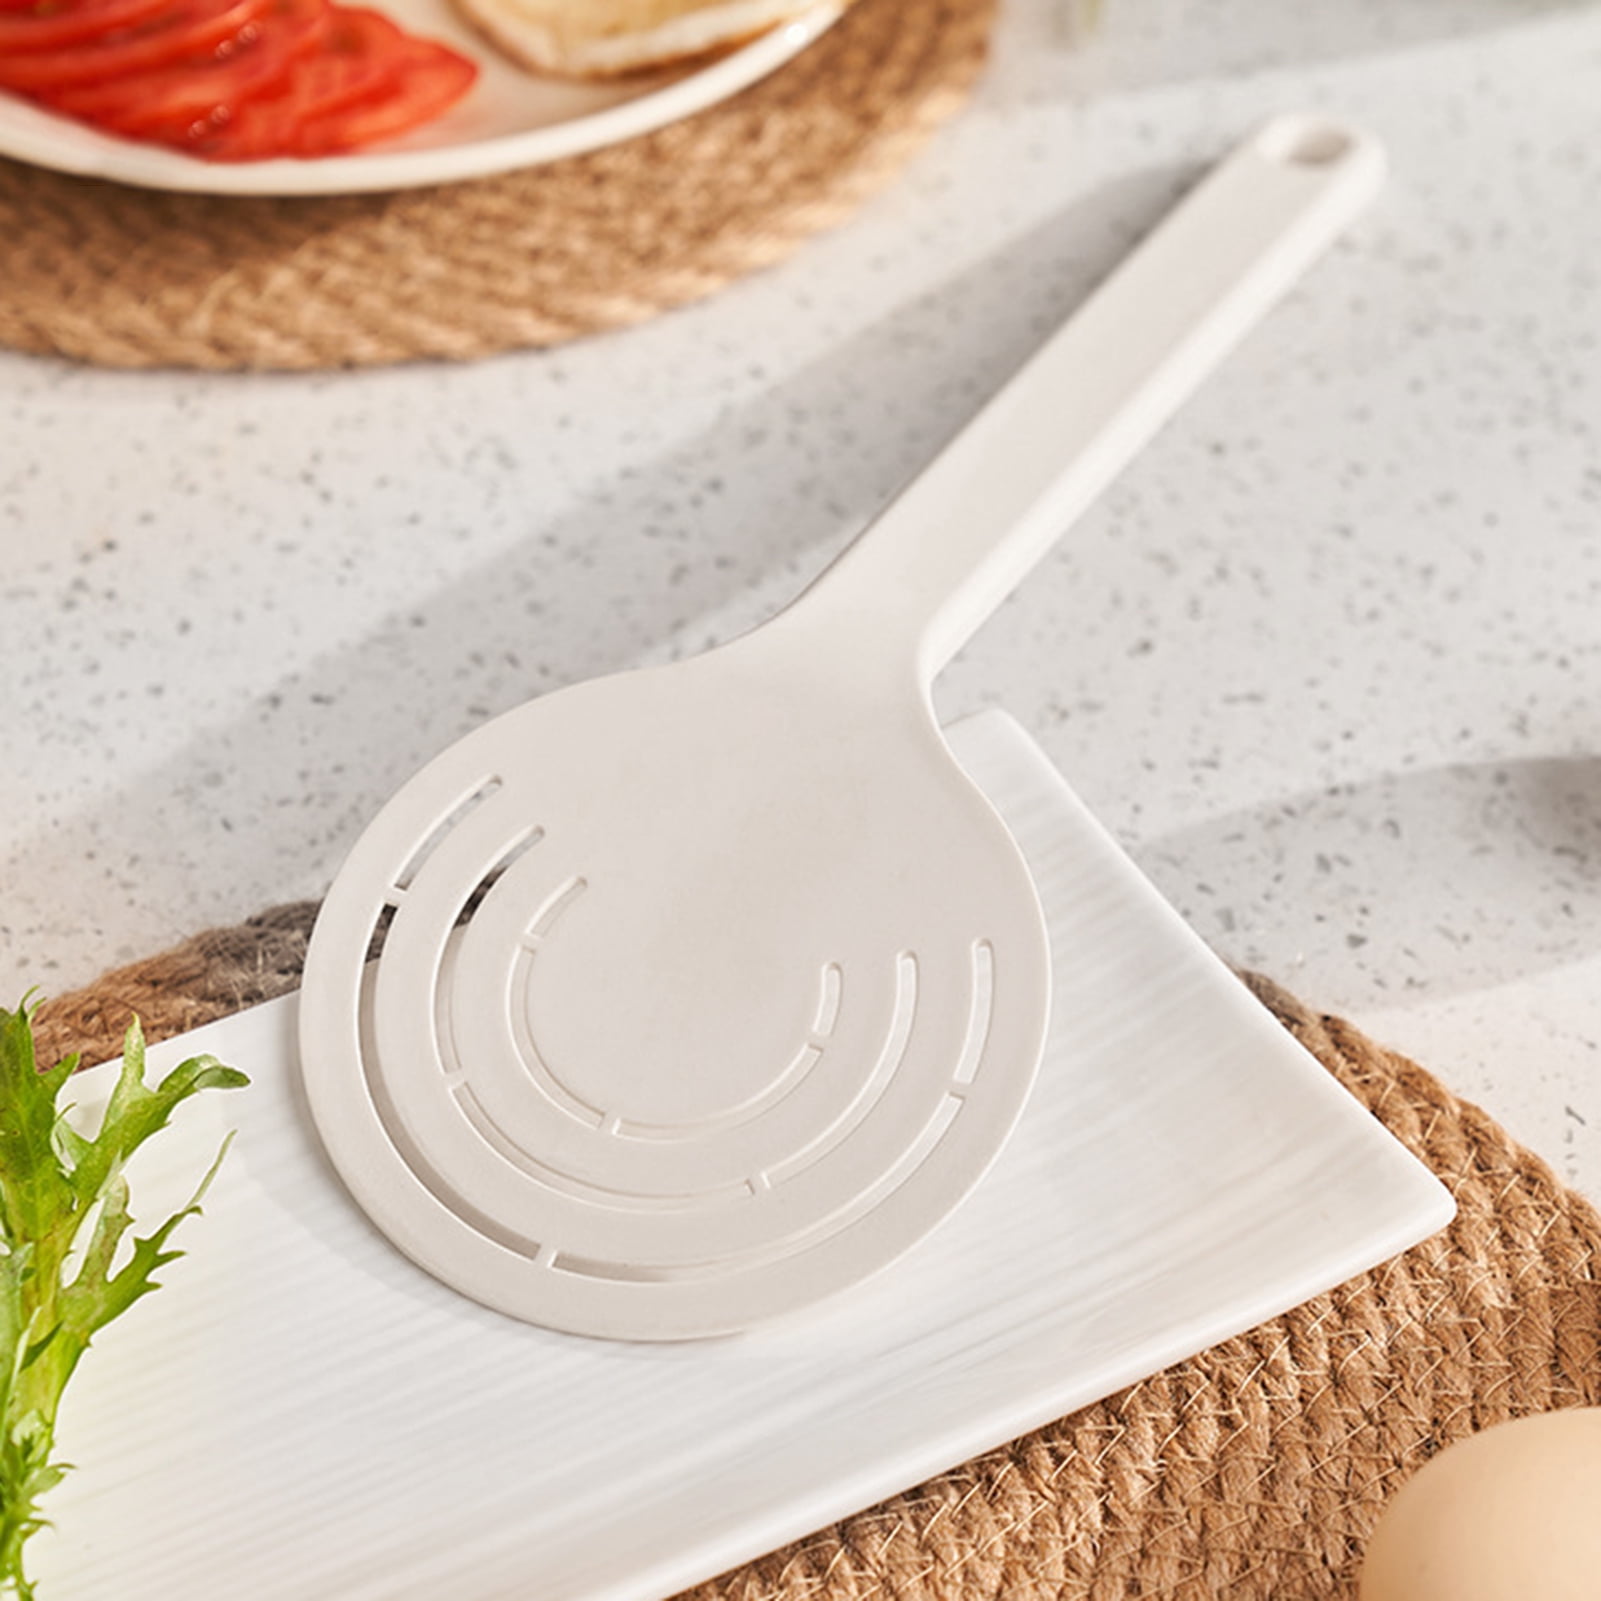 Pro Chef Kitchen Tools Stainless Steel Perforated Turner Spatula - Flipper  with Drain Hole to Cook and Serve Fish, Burgers, Eggs, Pancakes and Holes  Allow the Food to Easily Slide Off –